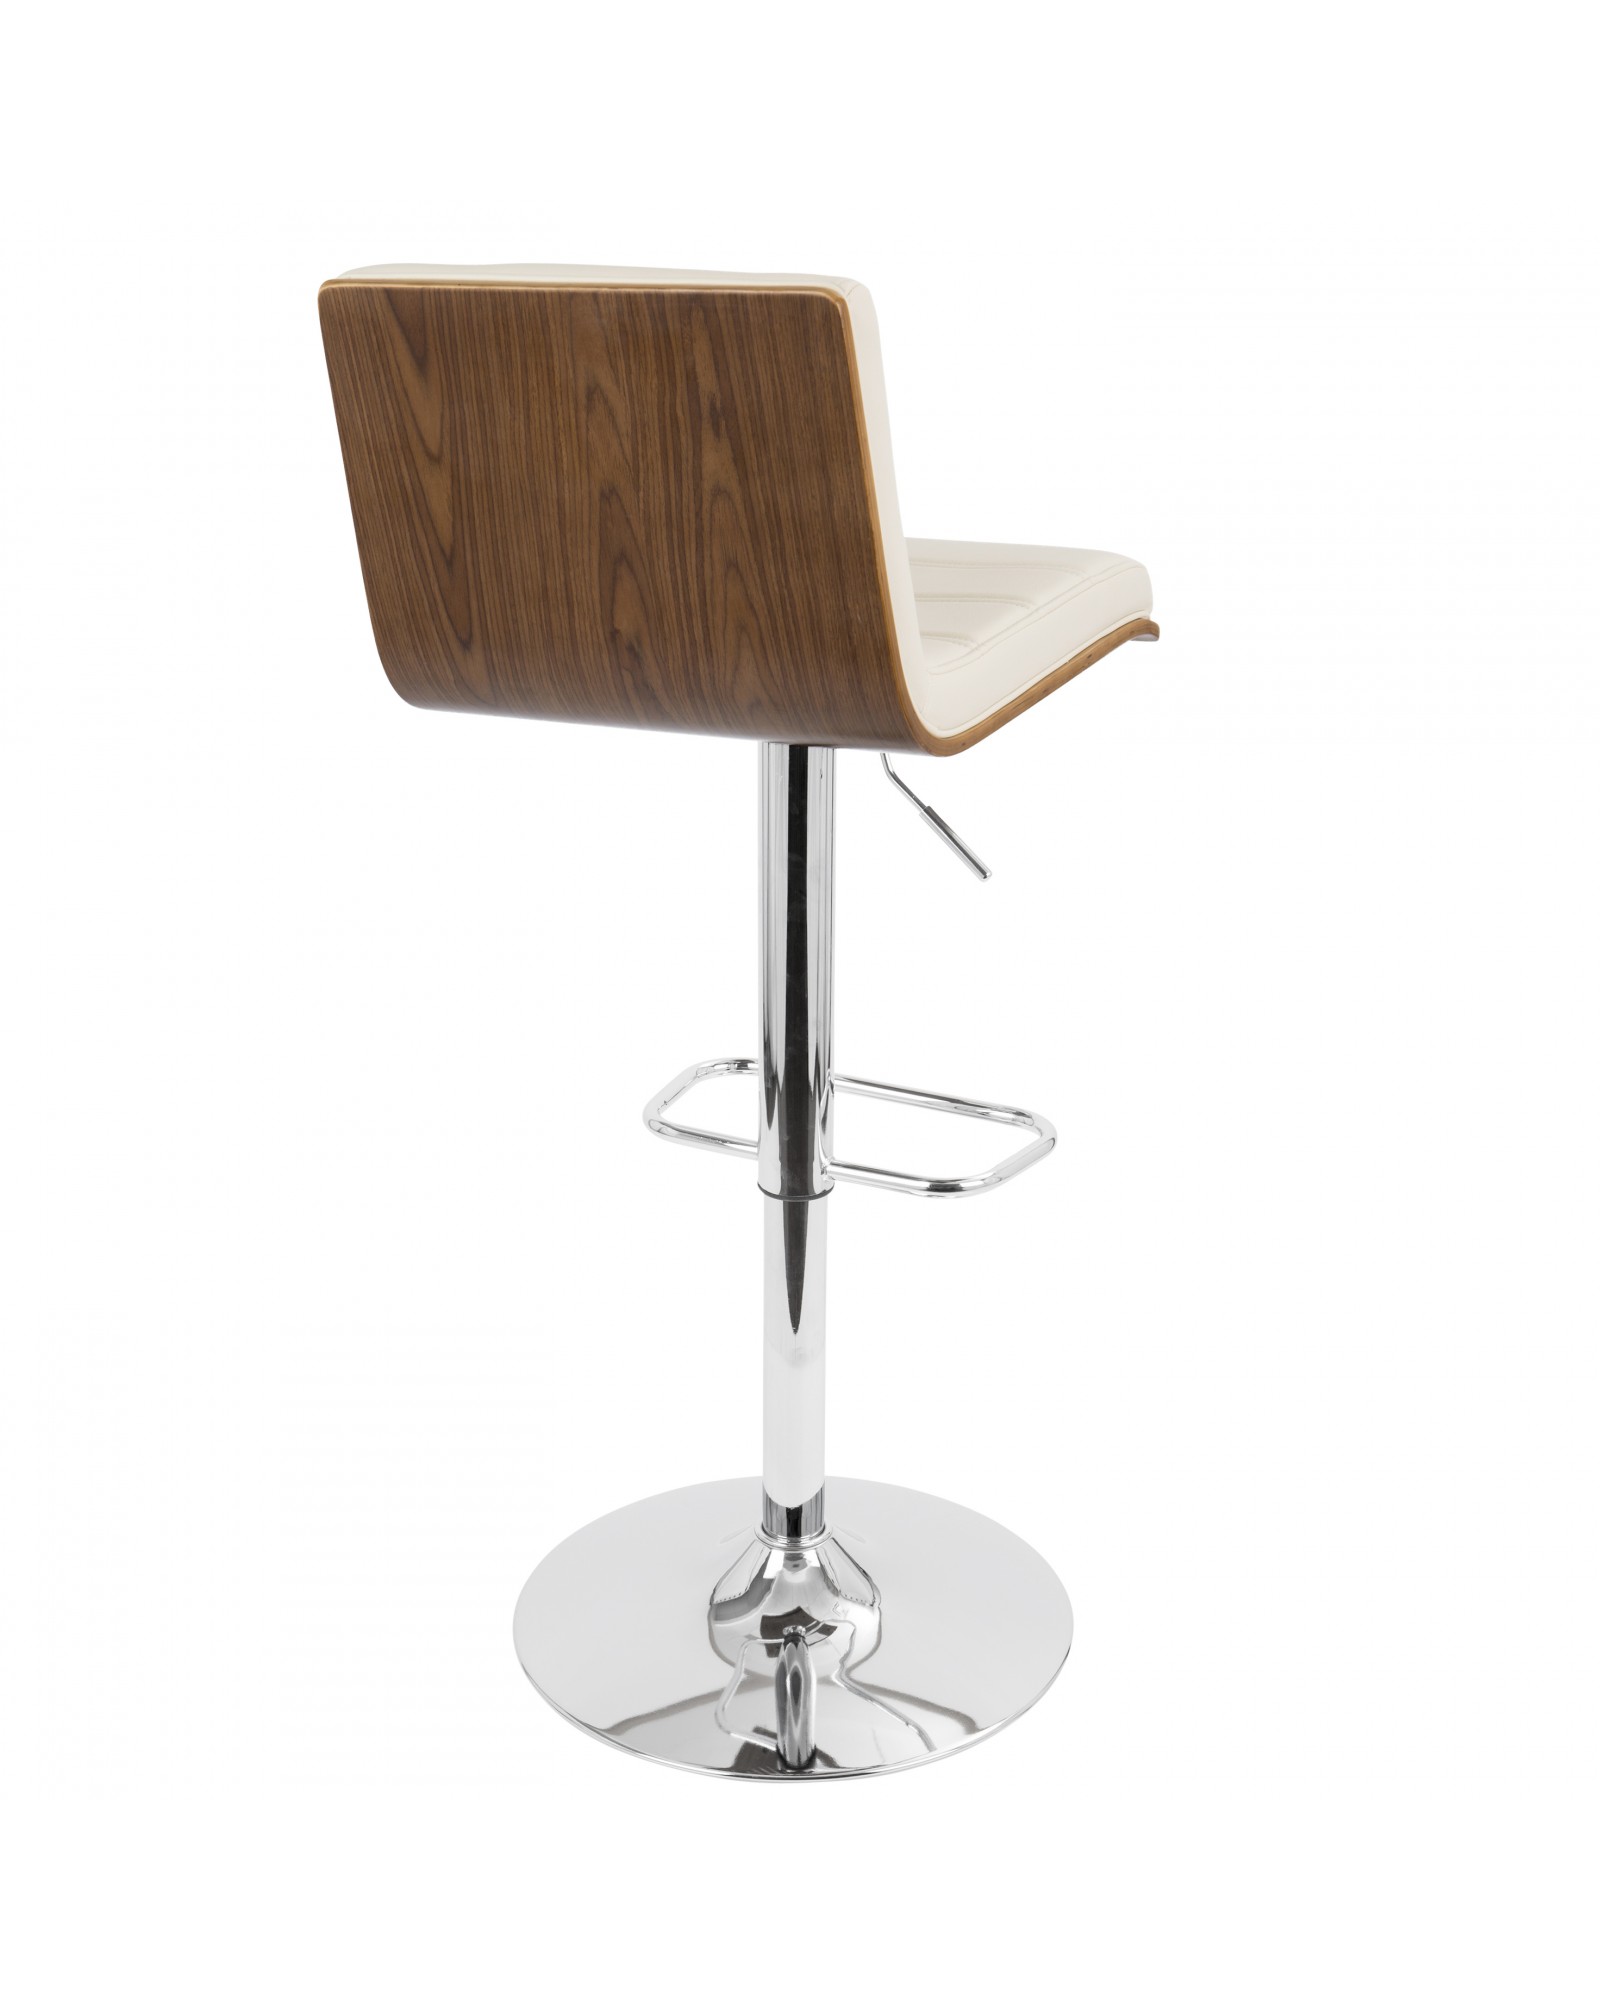 Vasari Mid-Century Modern Adjustable Barstool with Swivel in Walnut and Cream Faux Leather